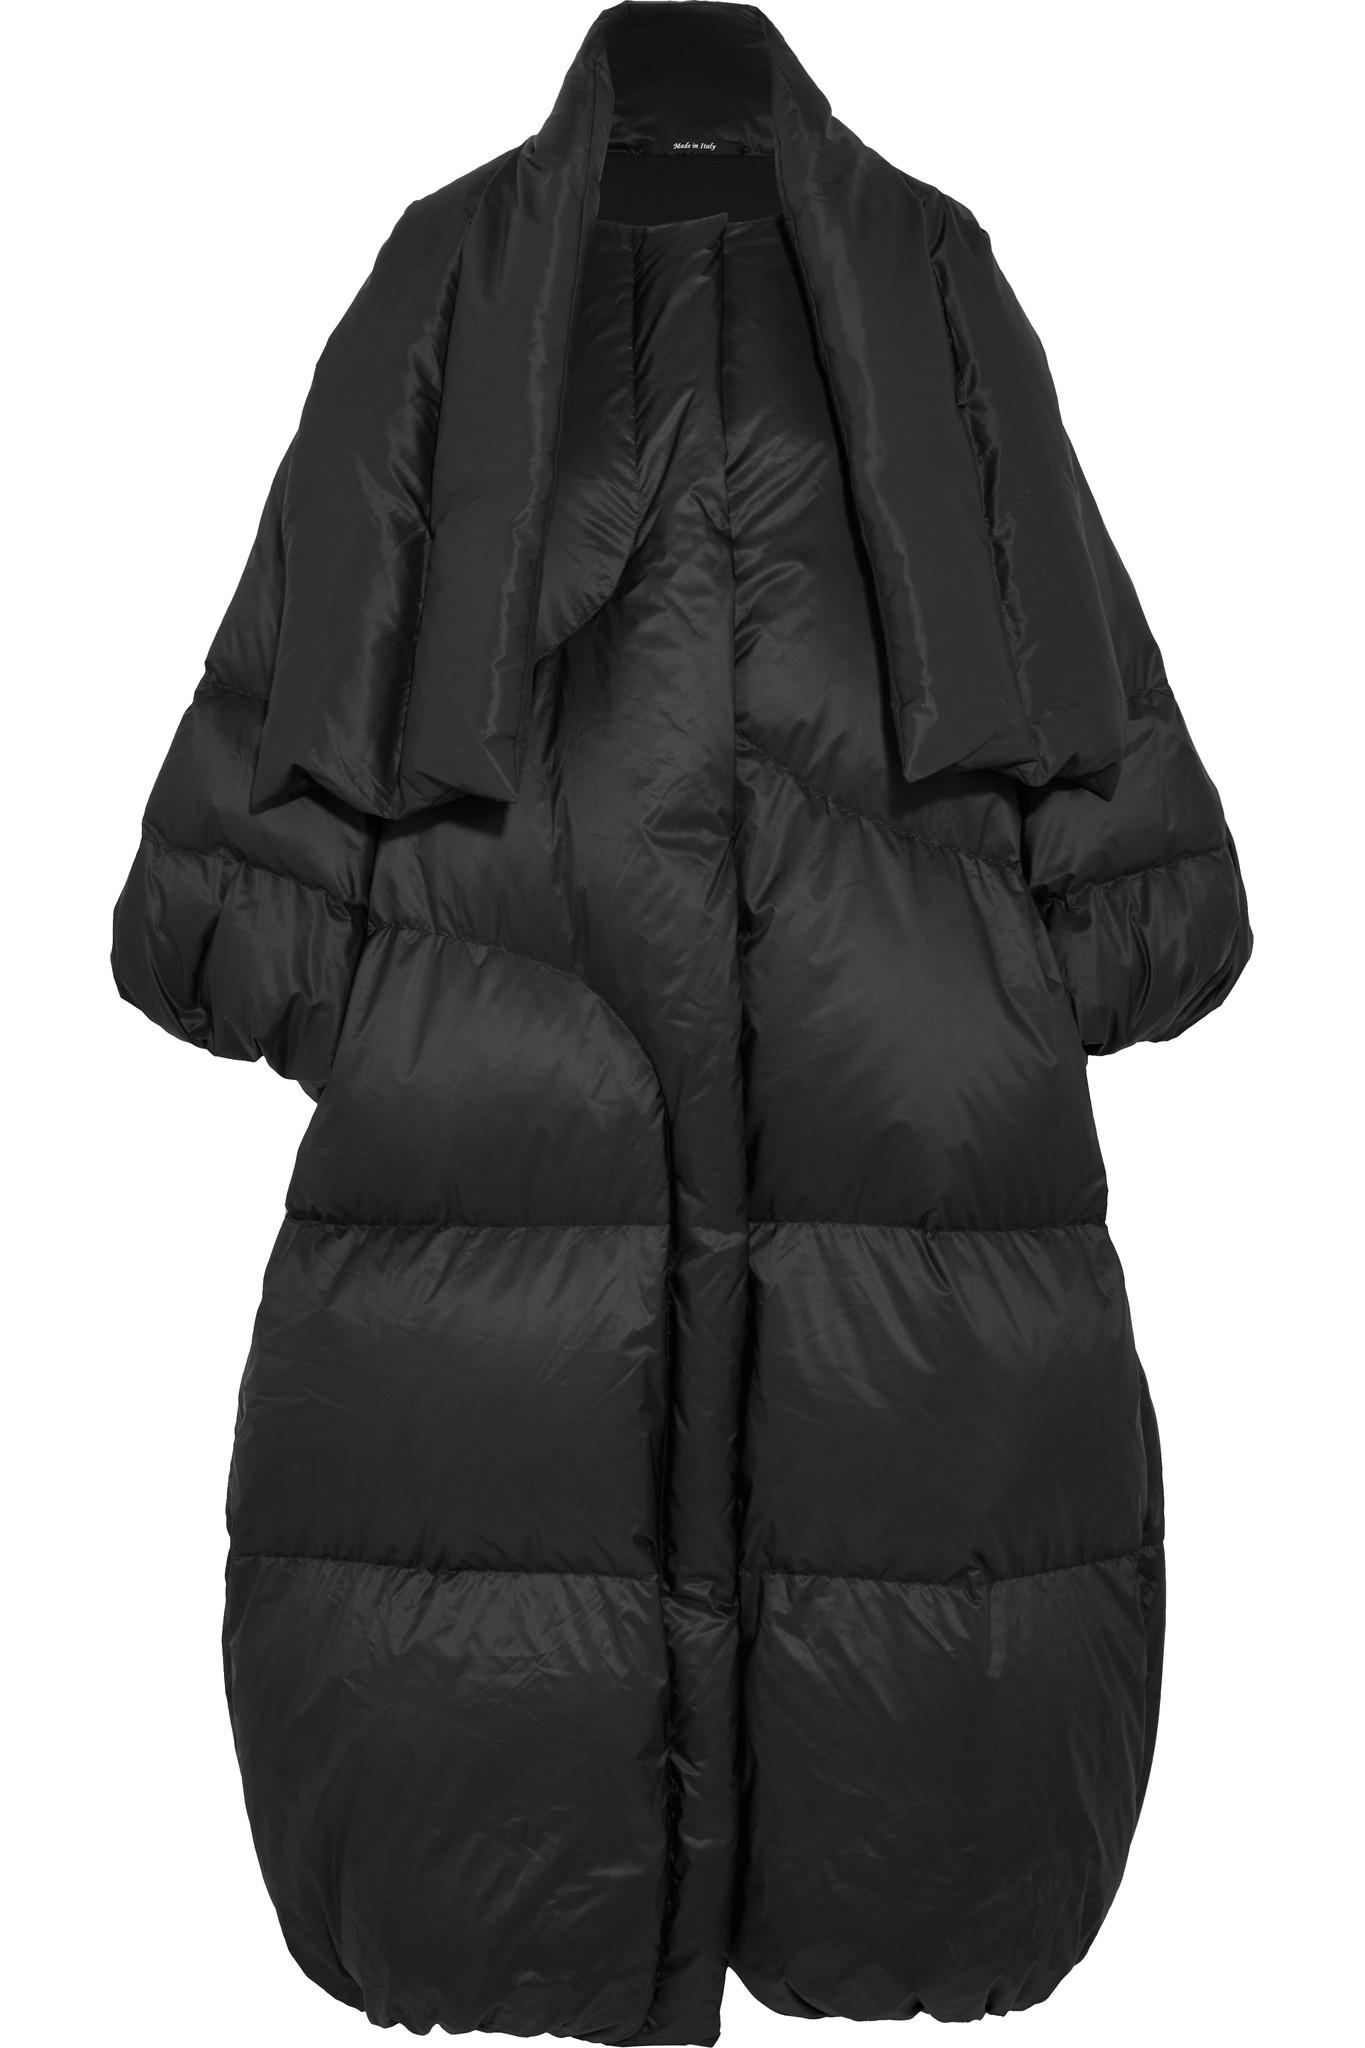 Lyst - Maison Margiela Oversized Quilted Shell Down Coat in Black